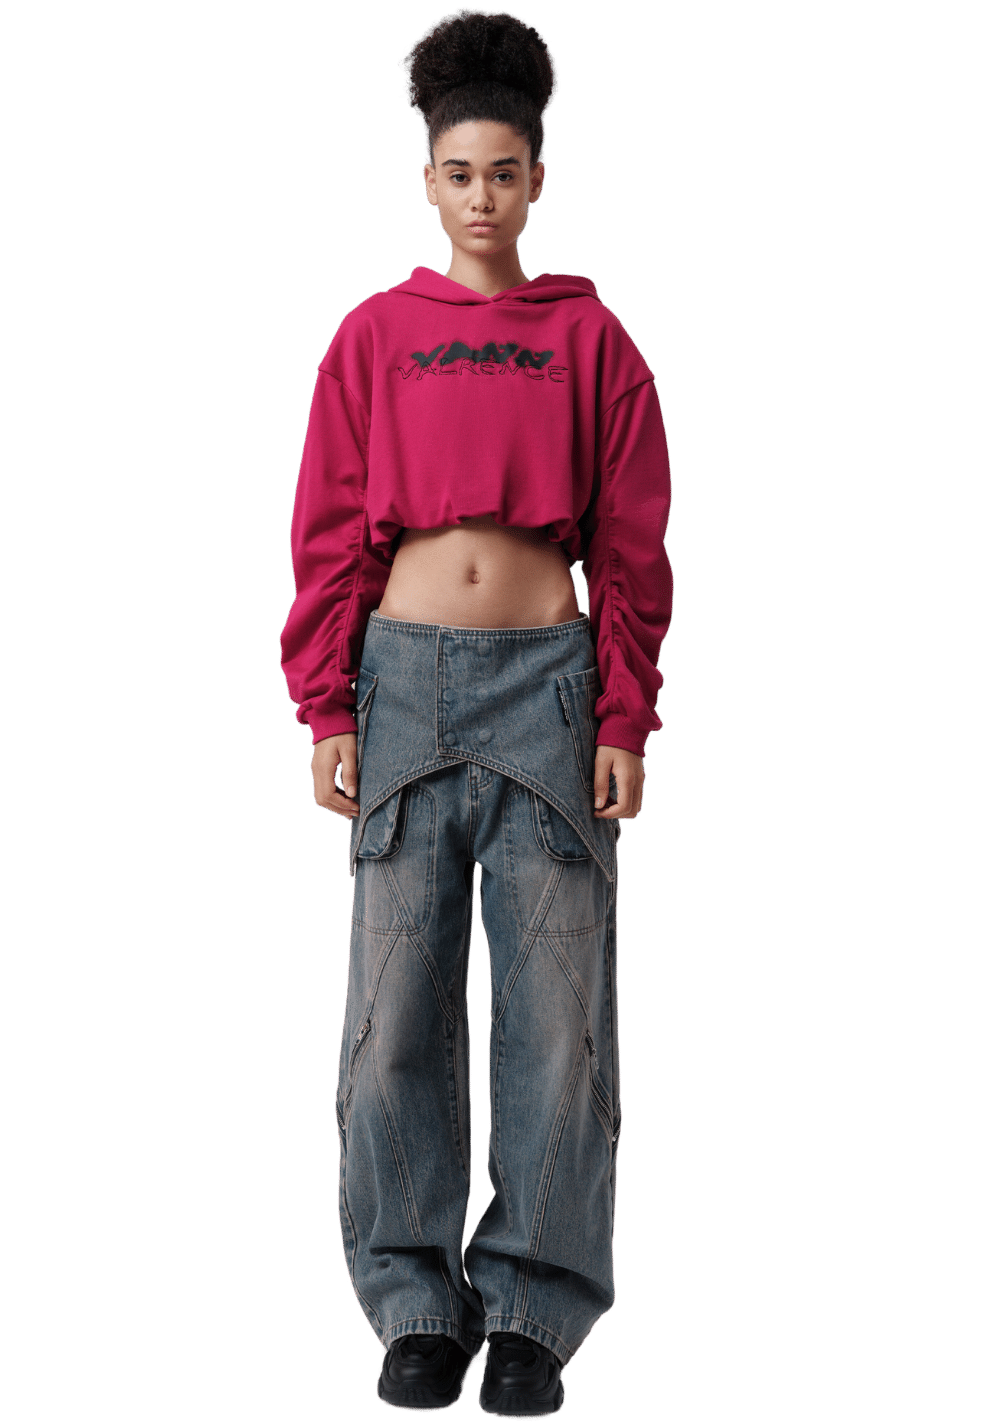 Two Piece Deconstructed Jeans - PSYLOS 1, Two Piece Deconstructed Jeans, Pants, VANN VALRENCÉ, PSYLOS 1